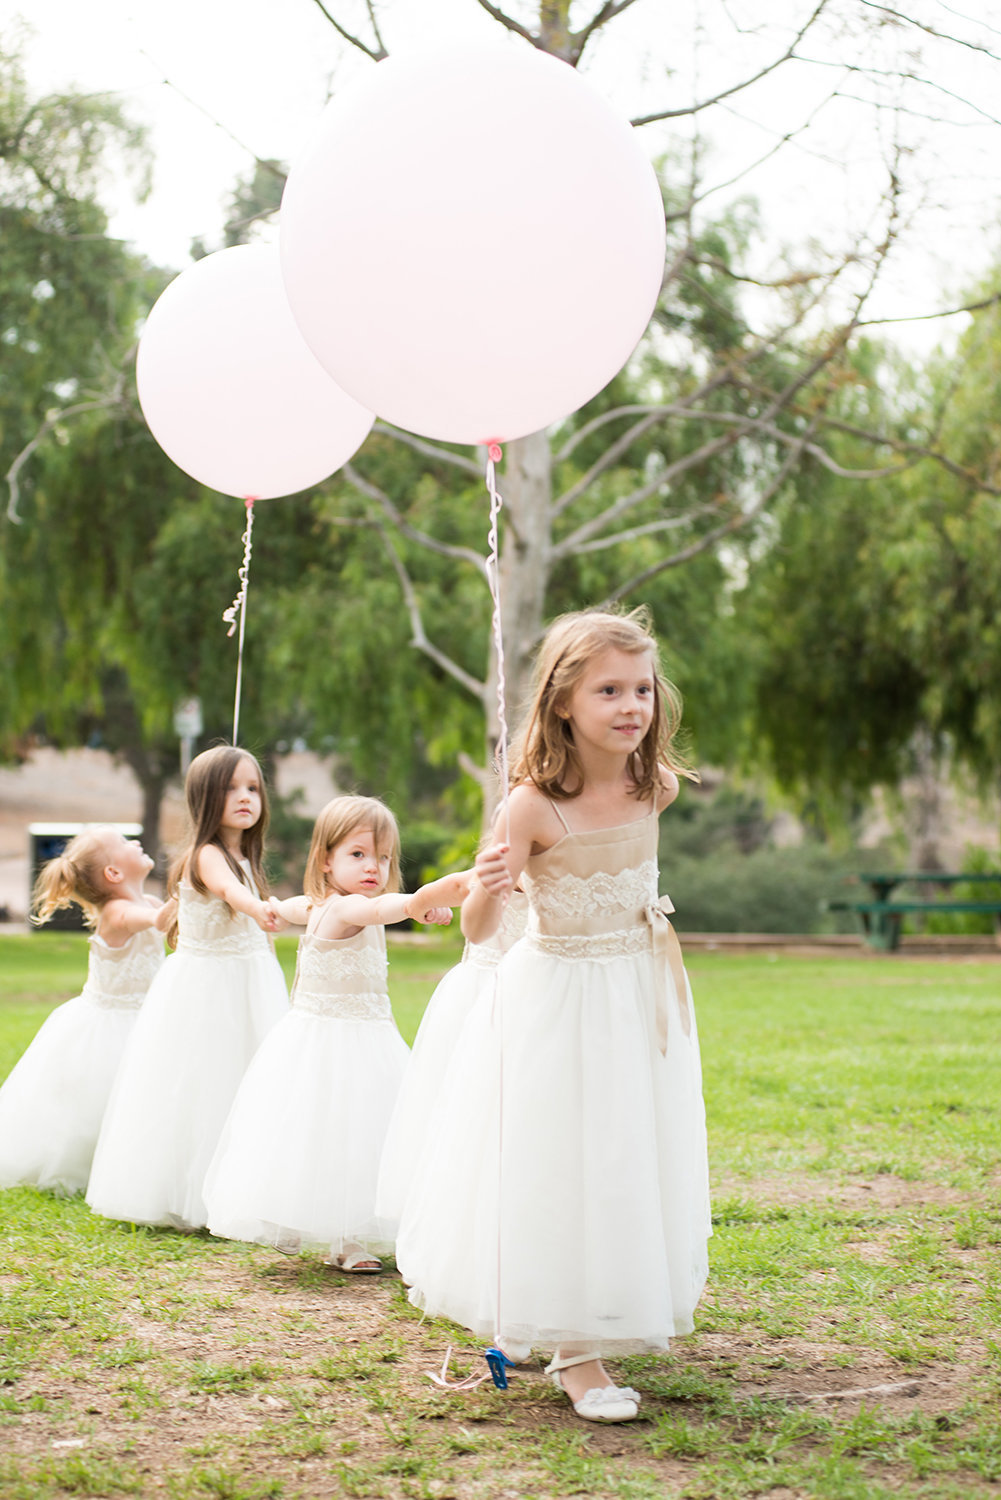 Flower girls make their entrance at an outdoor wedding ceremony